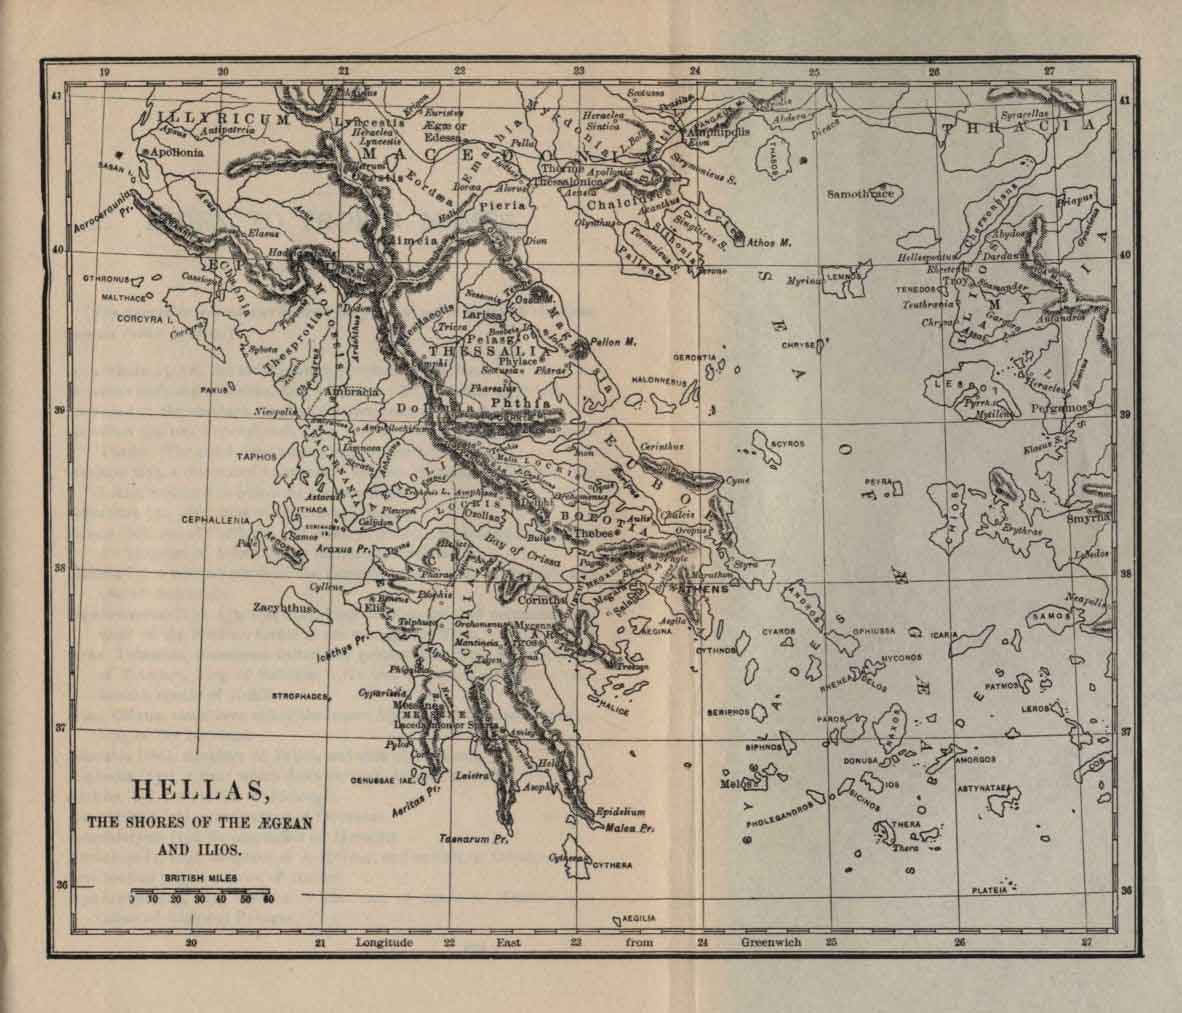 Map--HELLAS, THE SHORES OF THE ÆGEAN AND ILIOS.